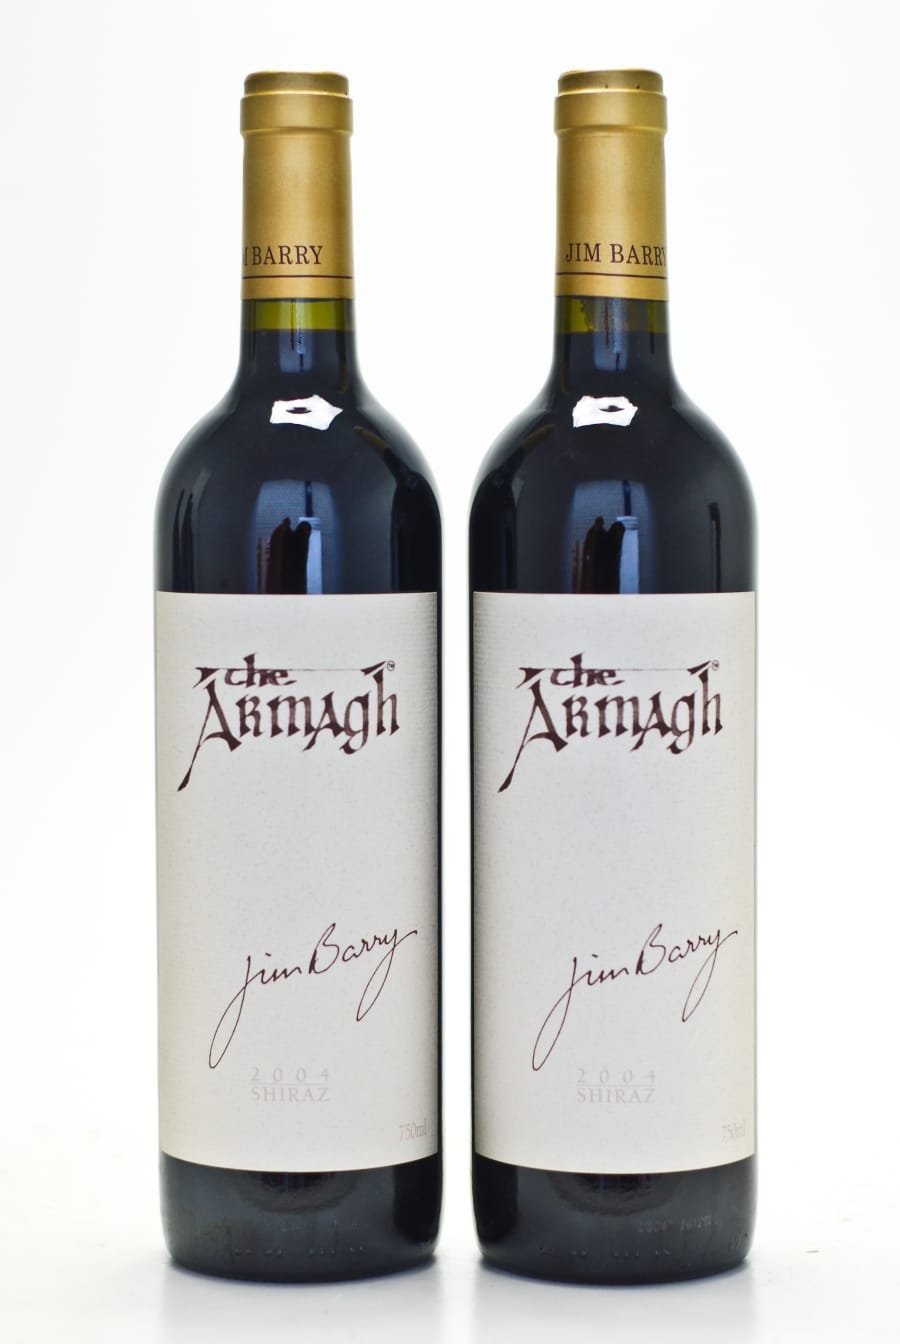 Jim Barry - Shiraz The Armagh 2004 Perfect